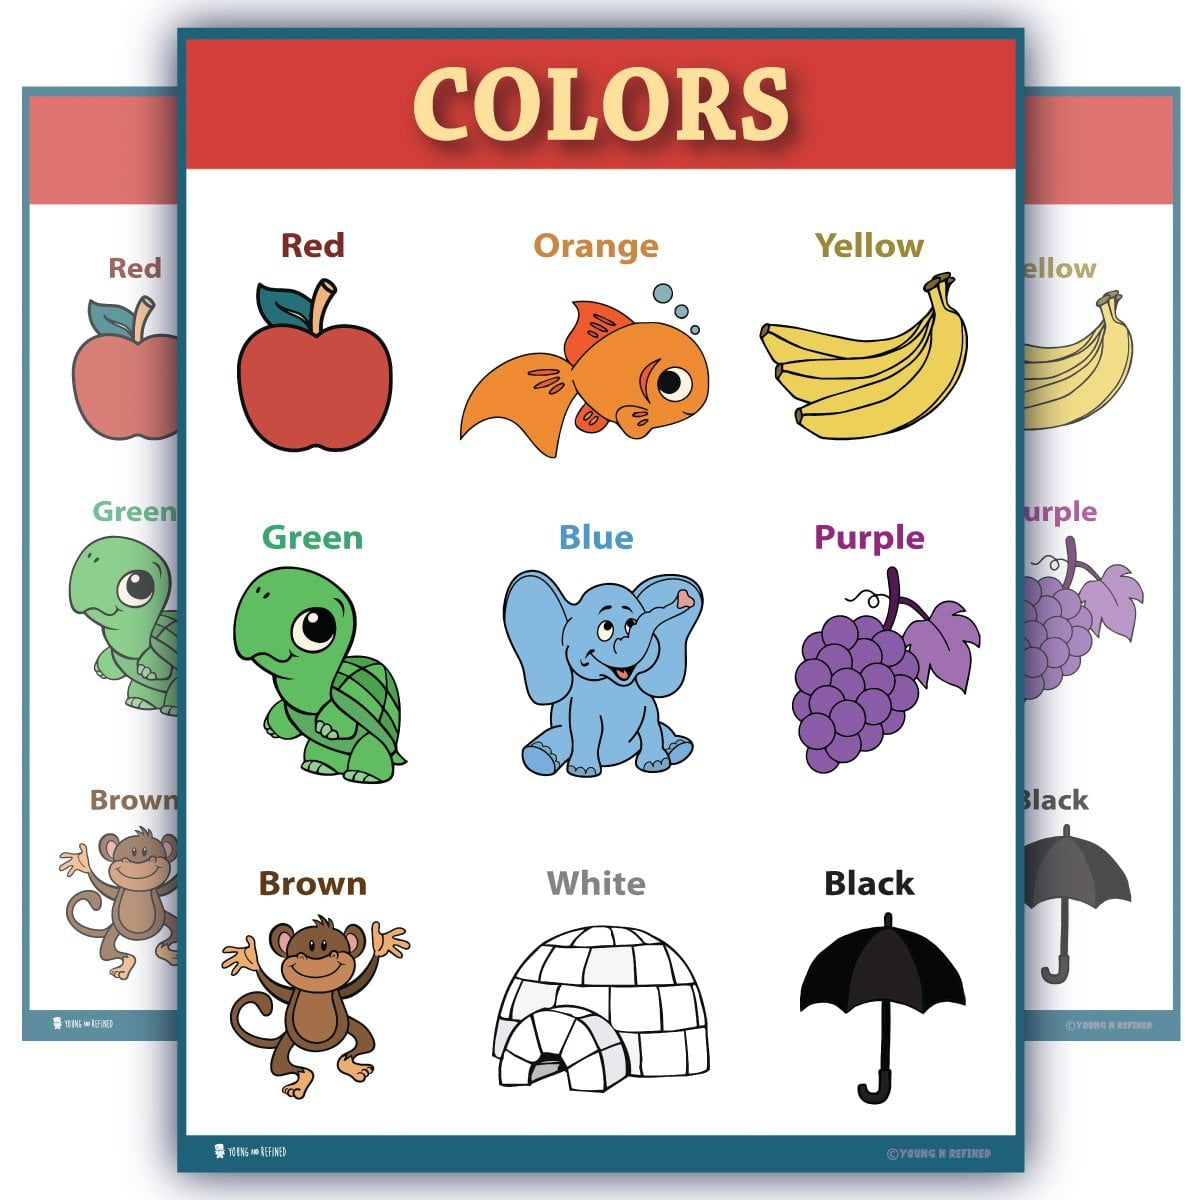 learning-colors-educational-poster-laminated-size-small-chart-for-toddlers-preschool-edu